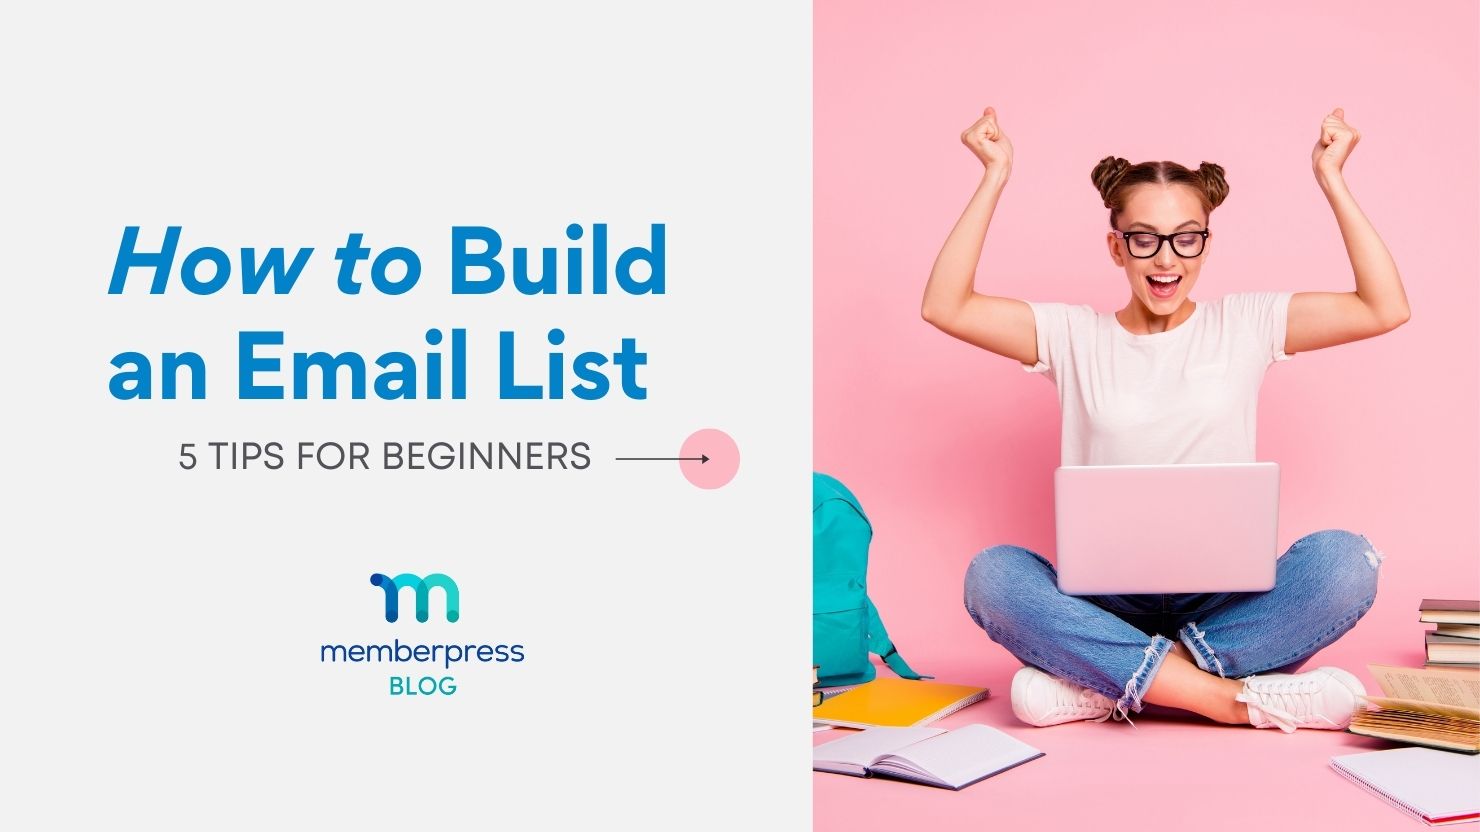 How to build an email list